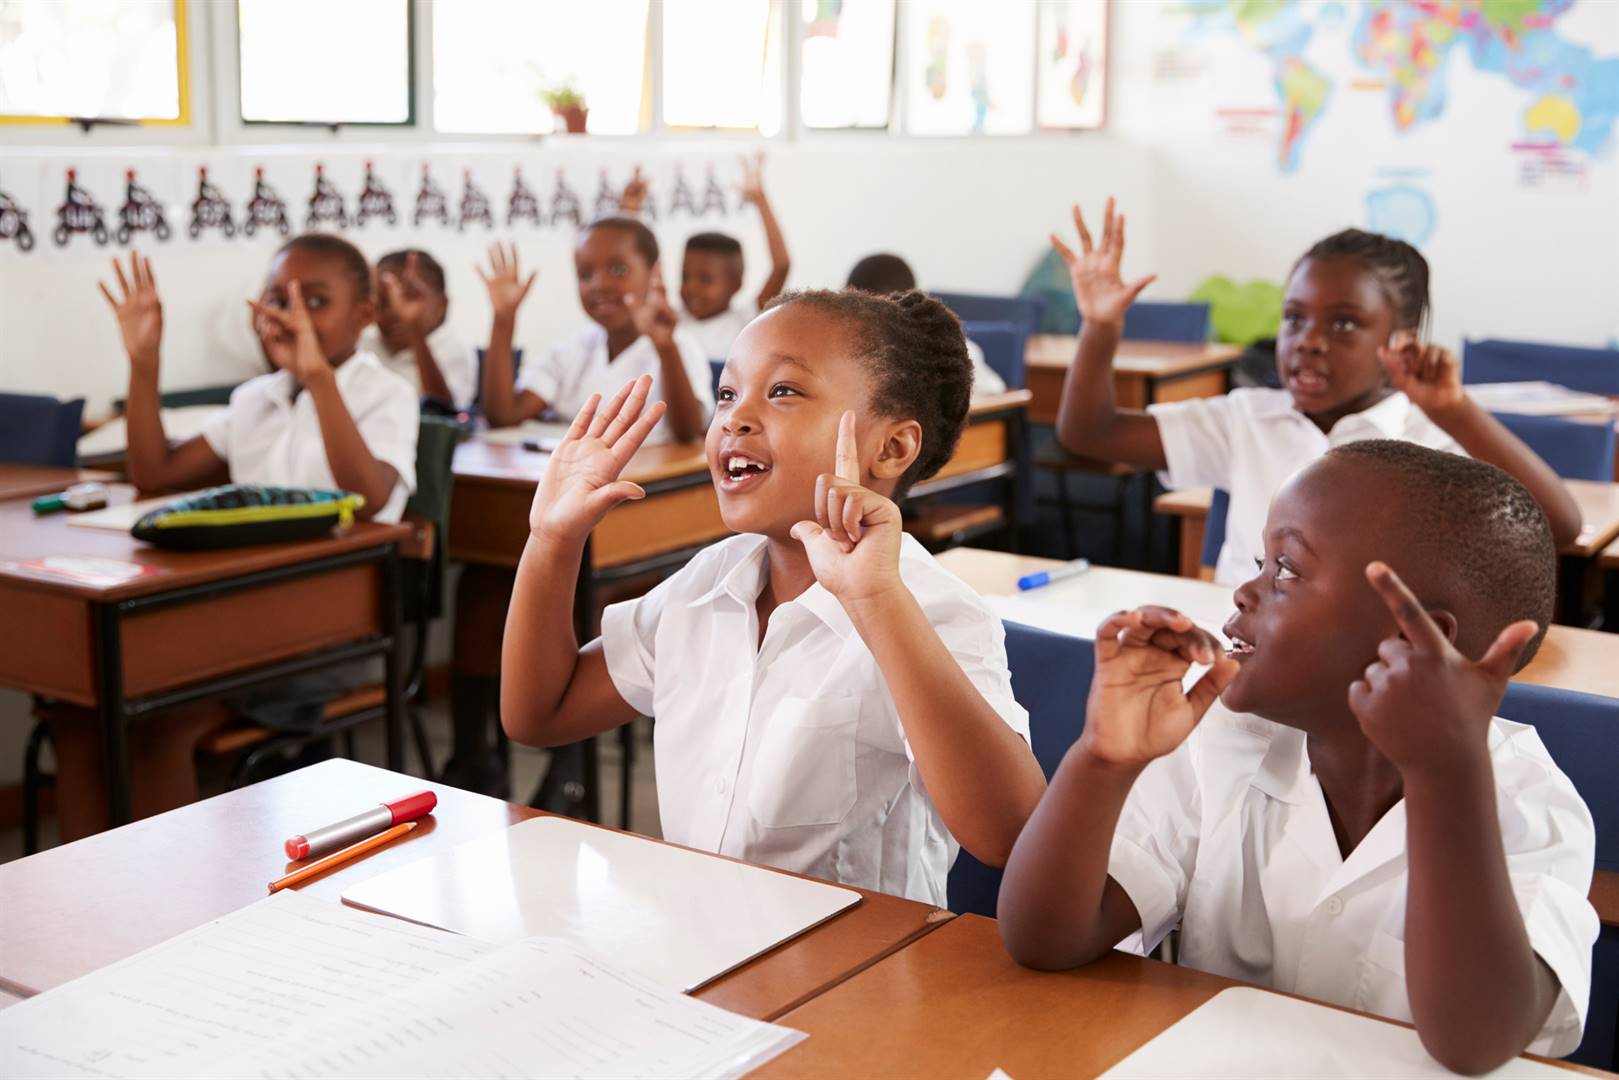 Under the proposed changes, South African children will be guaranteed an equitable, accessible and quality education, as provided for in the Constitution. 